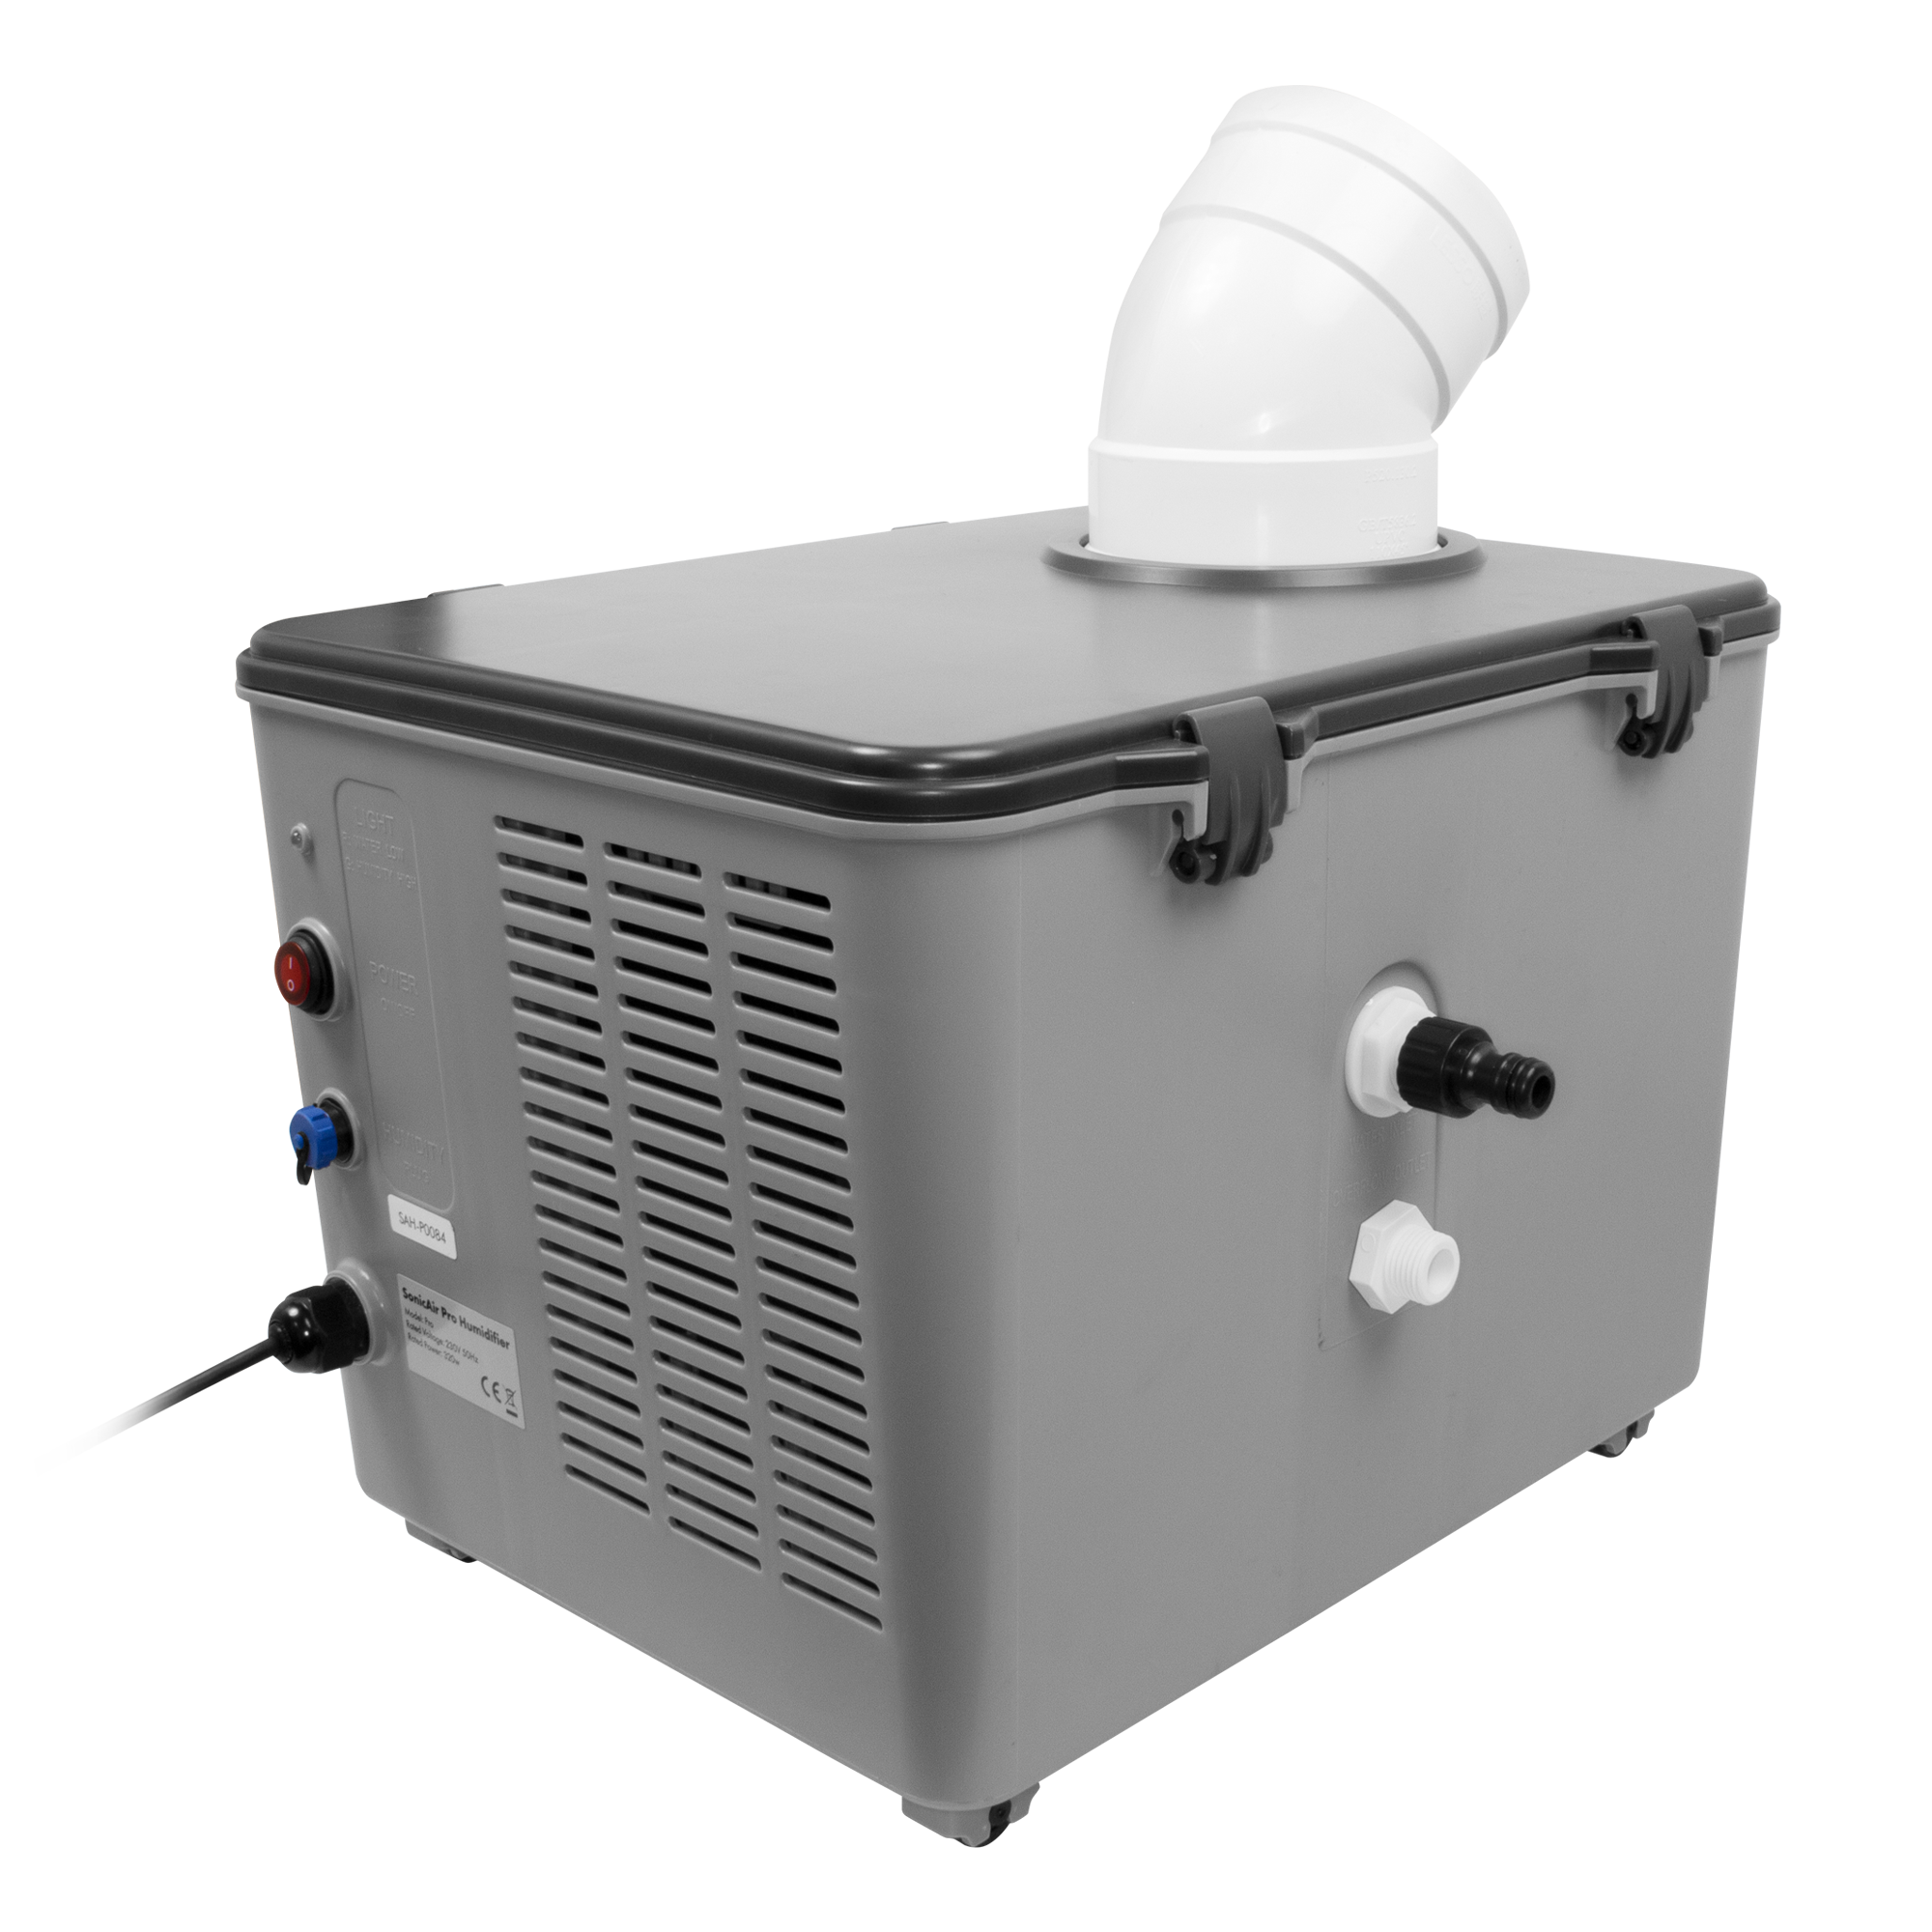 SonicAir Pro humidifier